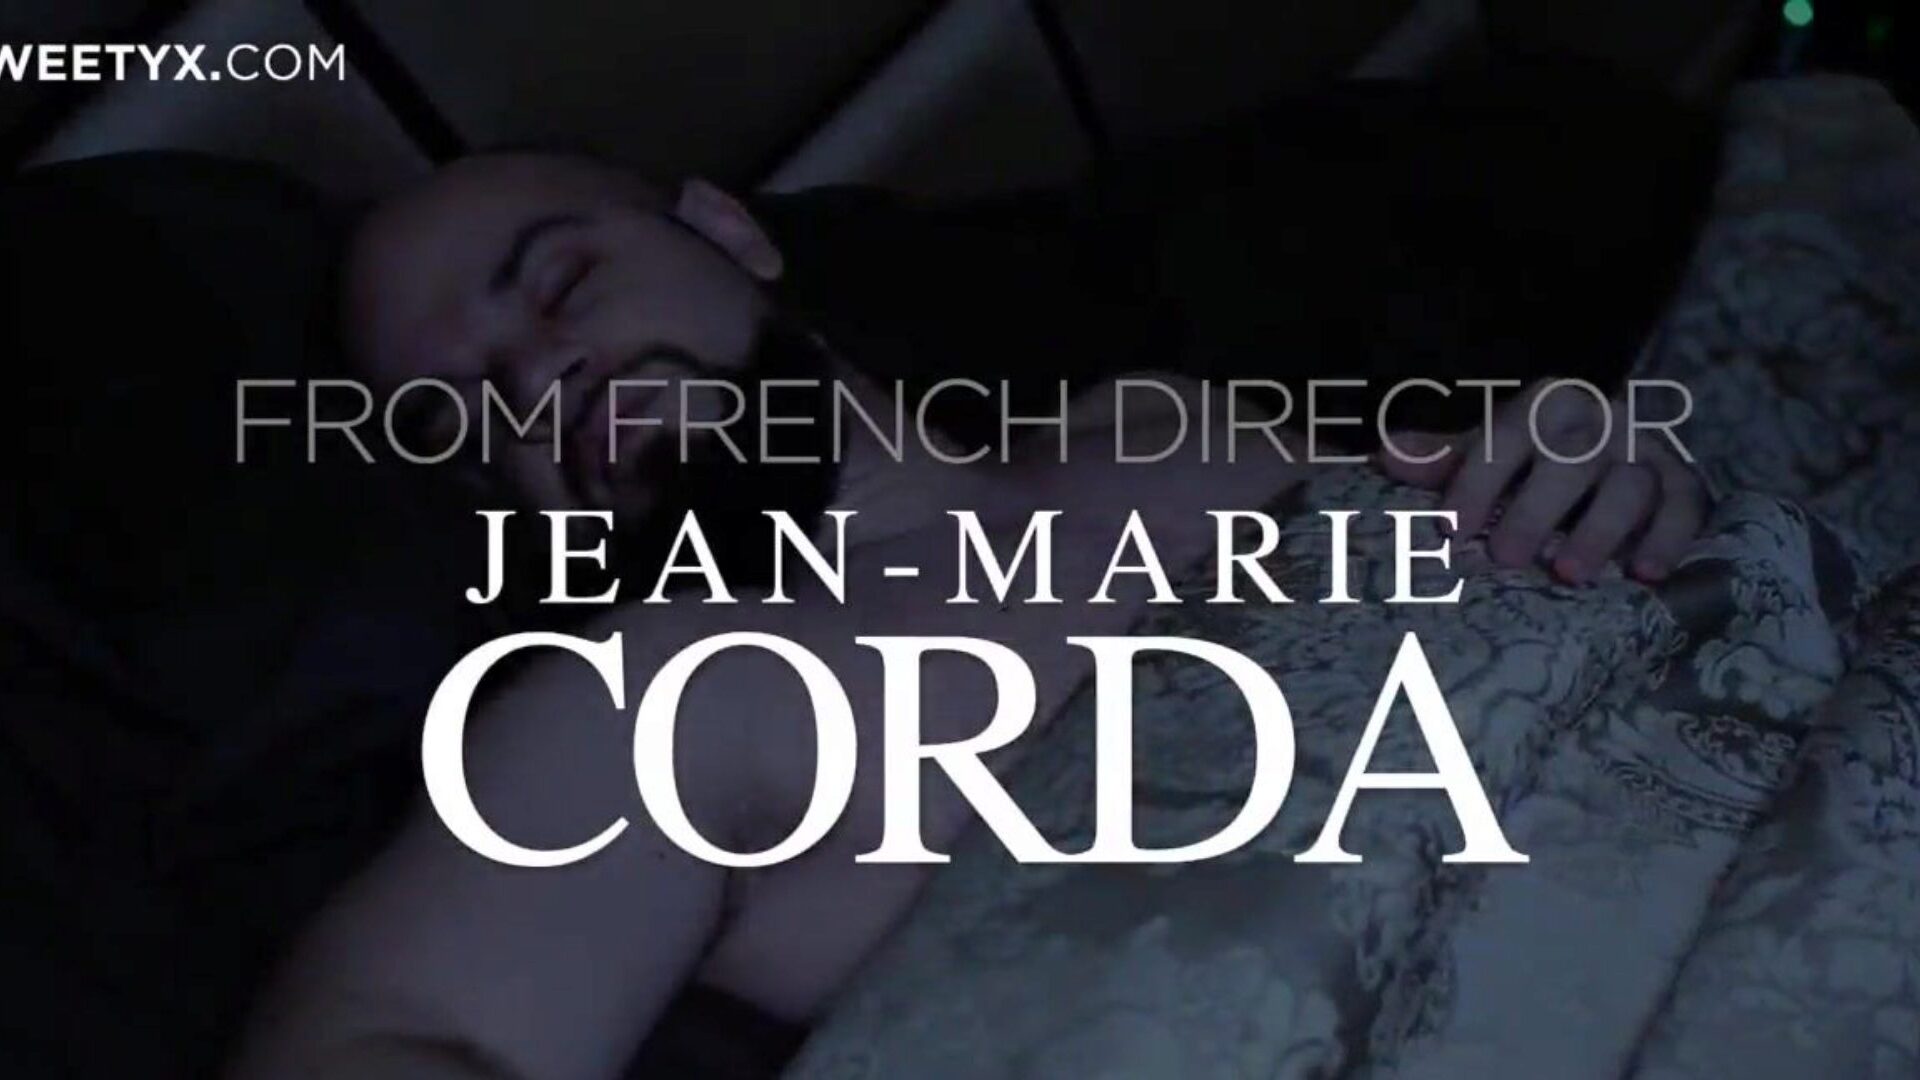 Awesome assfucking fuck-fest with Jean-Marie Corda